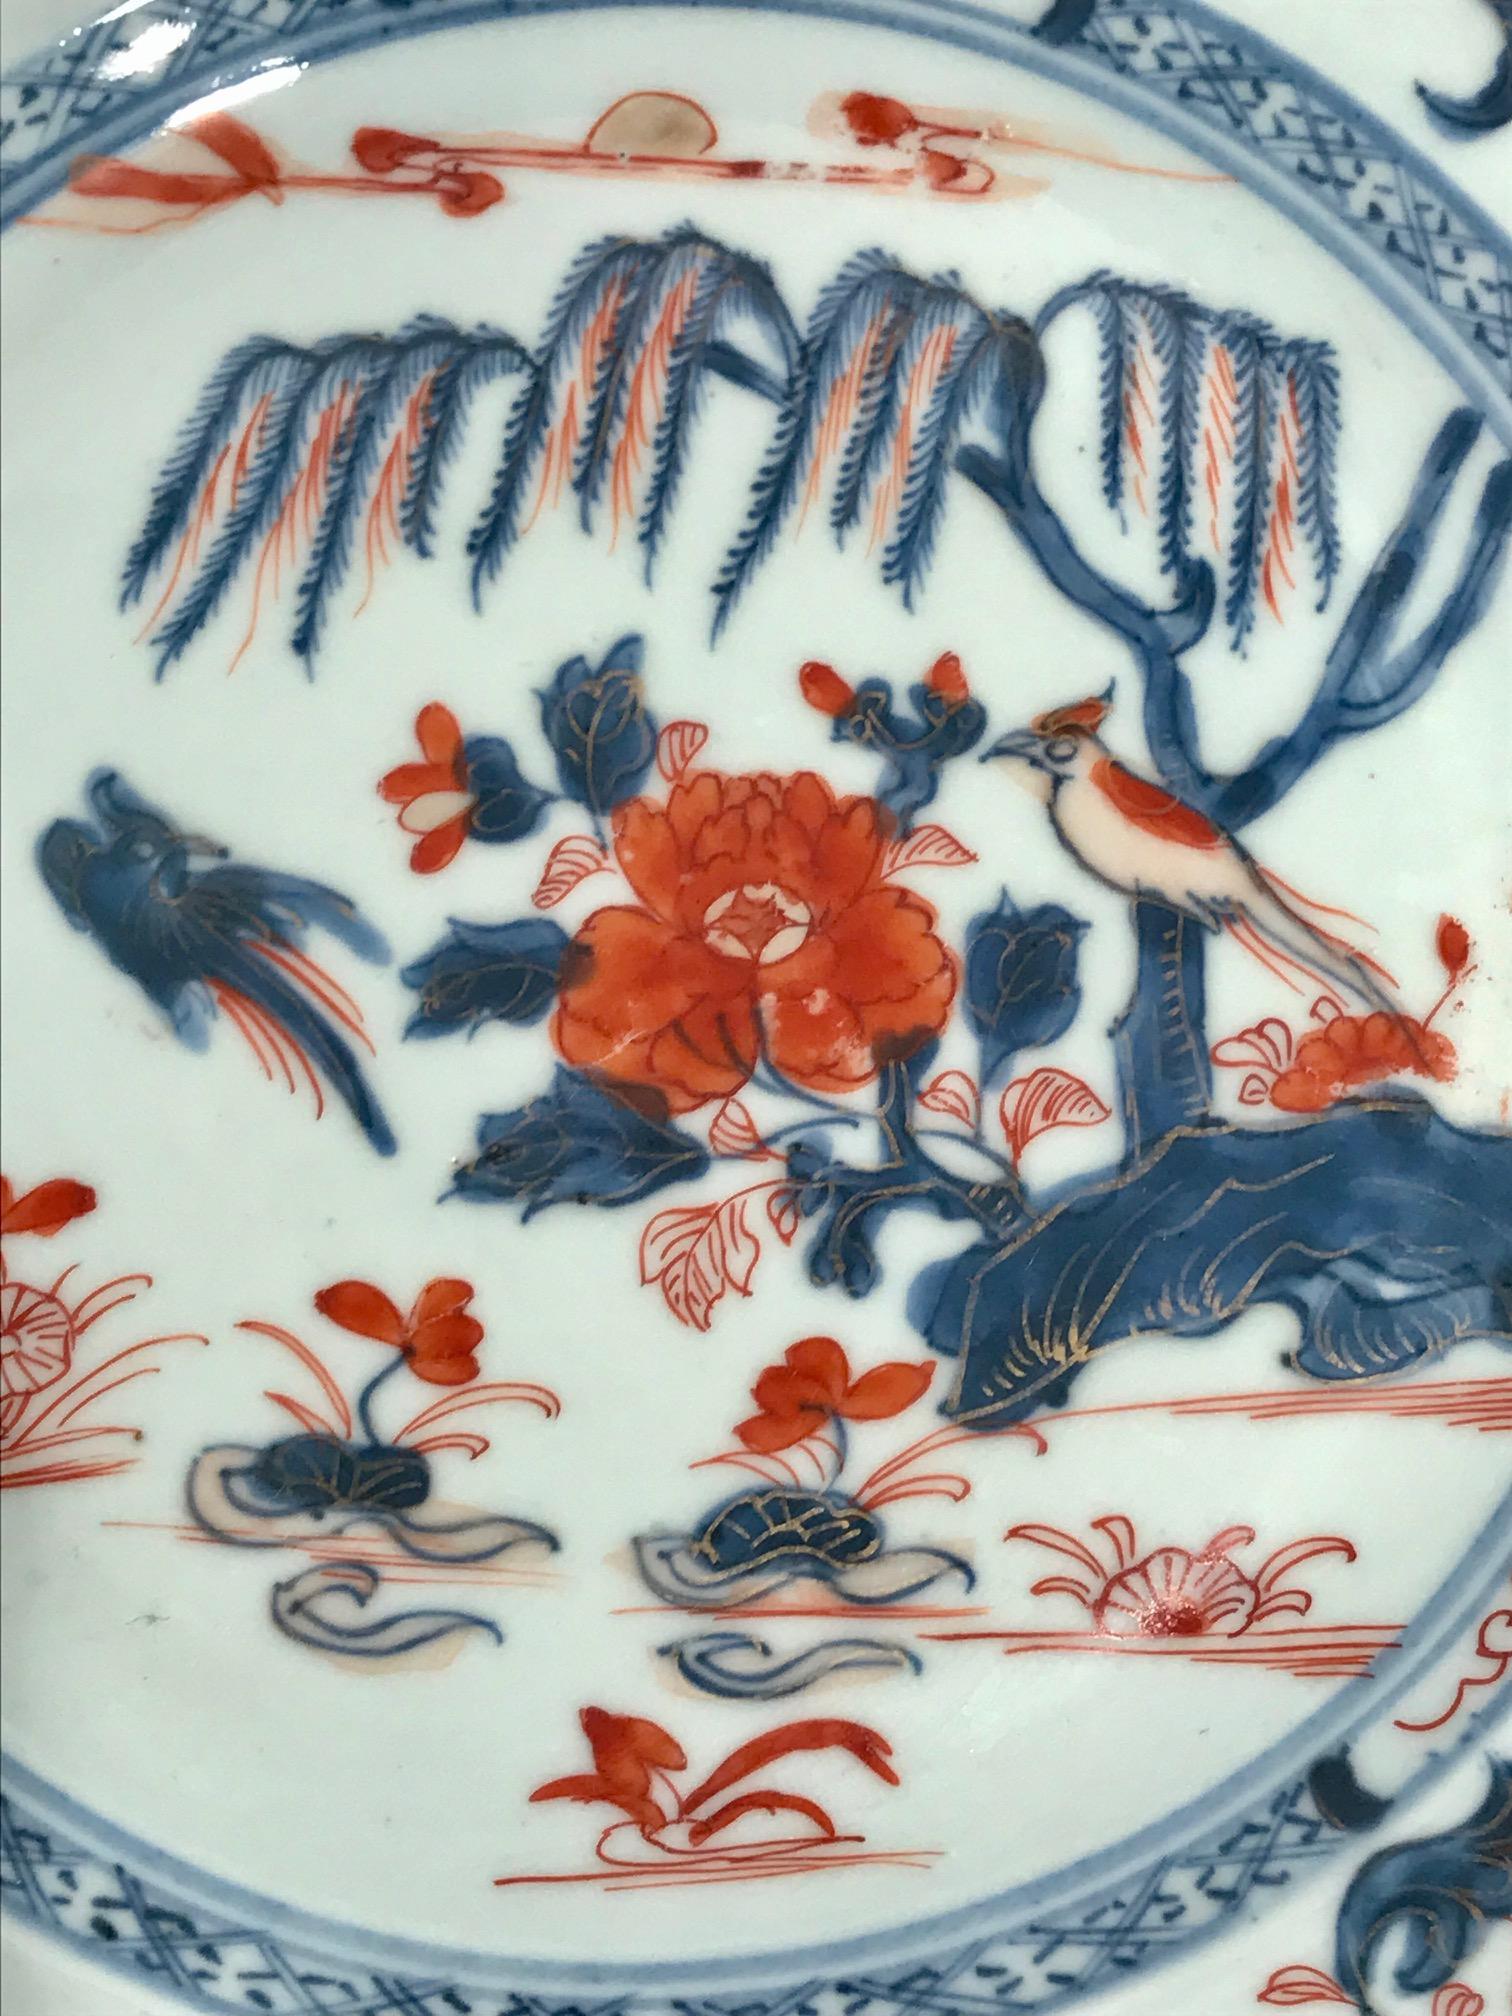 Antique Chinese export plate known as Chinese Imari from the Elinor Gordon Collection. Hand decorated first in an underglaze blue and then overpainted in iron red and gold. The center scene is of a tree surrounded by an outer border of scrolling